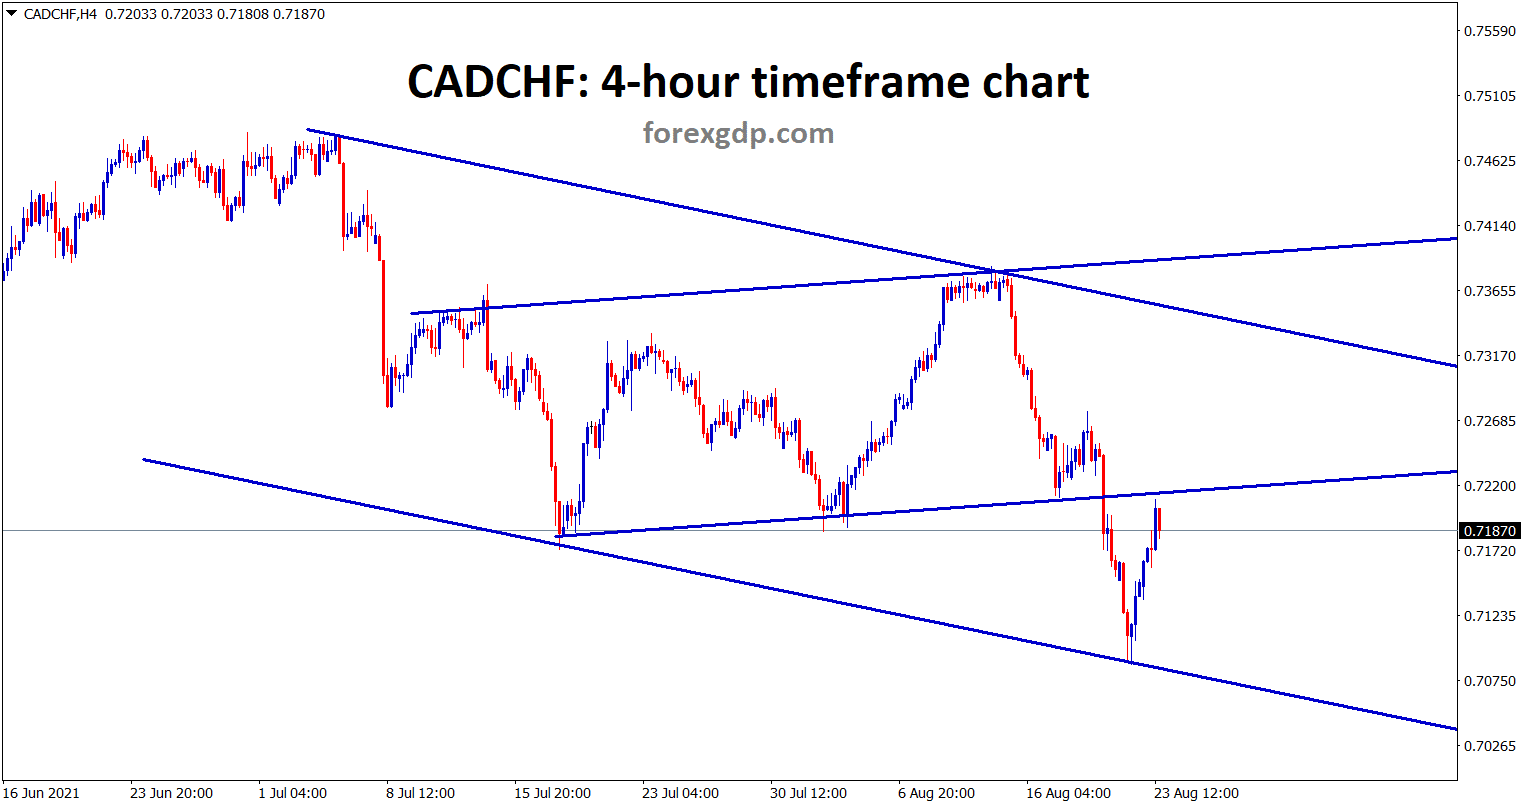 CADCHF is hits the previous broken level of the minor ranging line